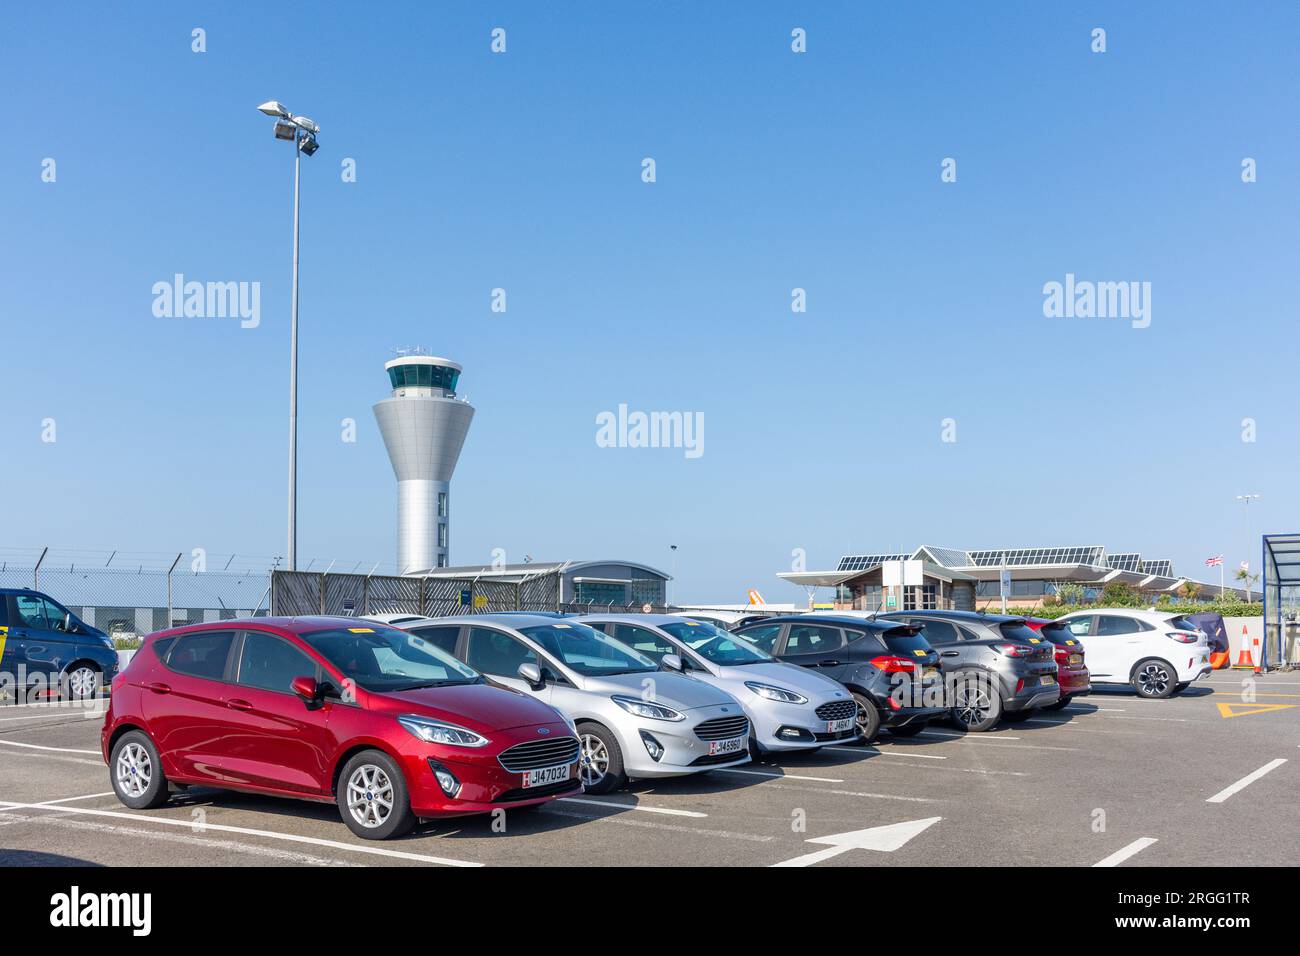 Hire-car car park at Jersey International Airport, St Peter, Jersey, Channel Islands Stock Photo